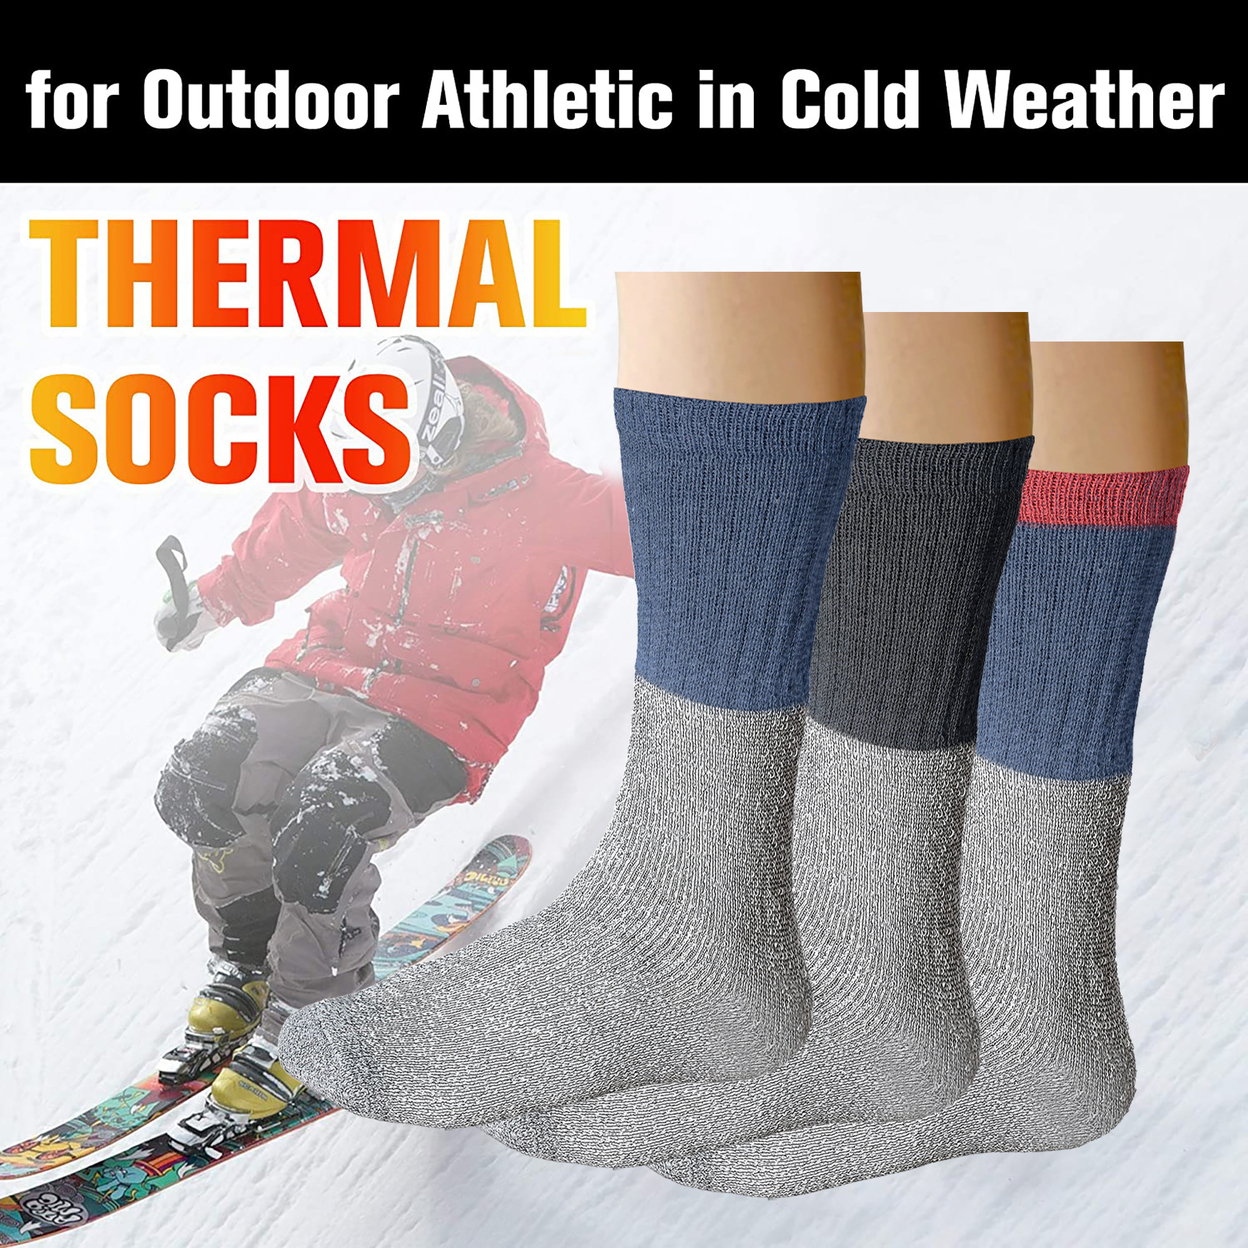 3-Pairs: Women's Winter Warm Thick Heated Cozy Thermal Crew Socks